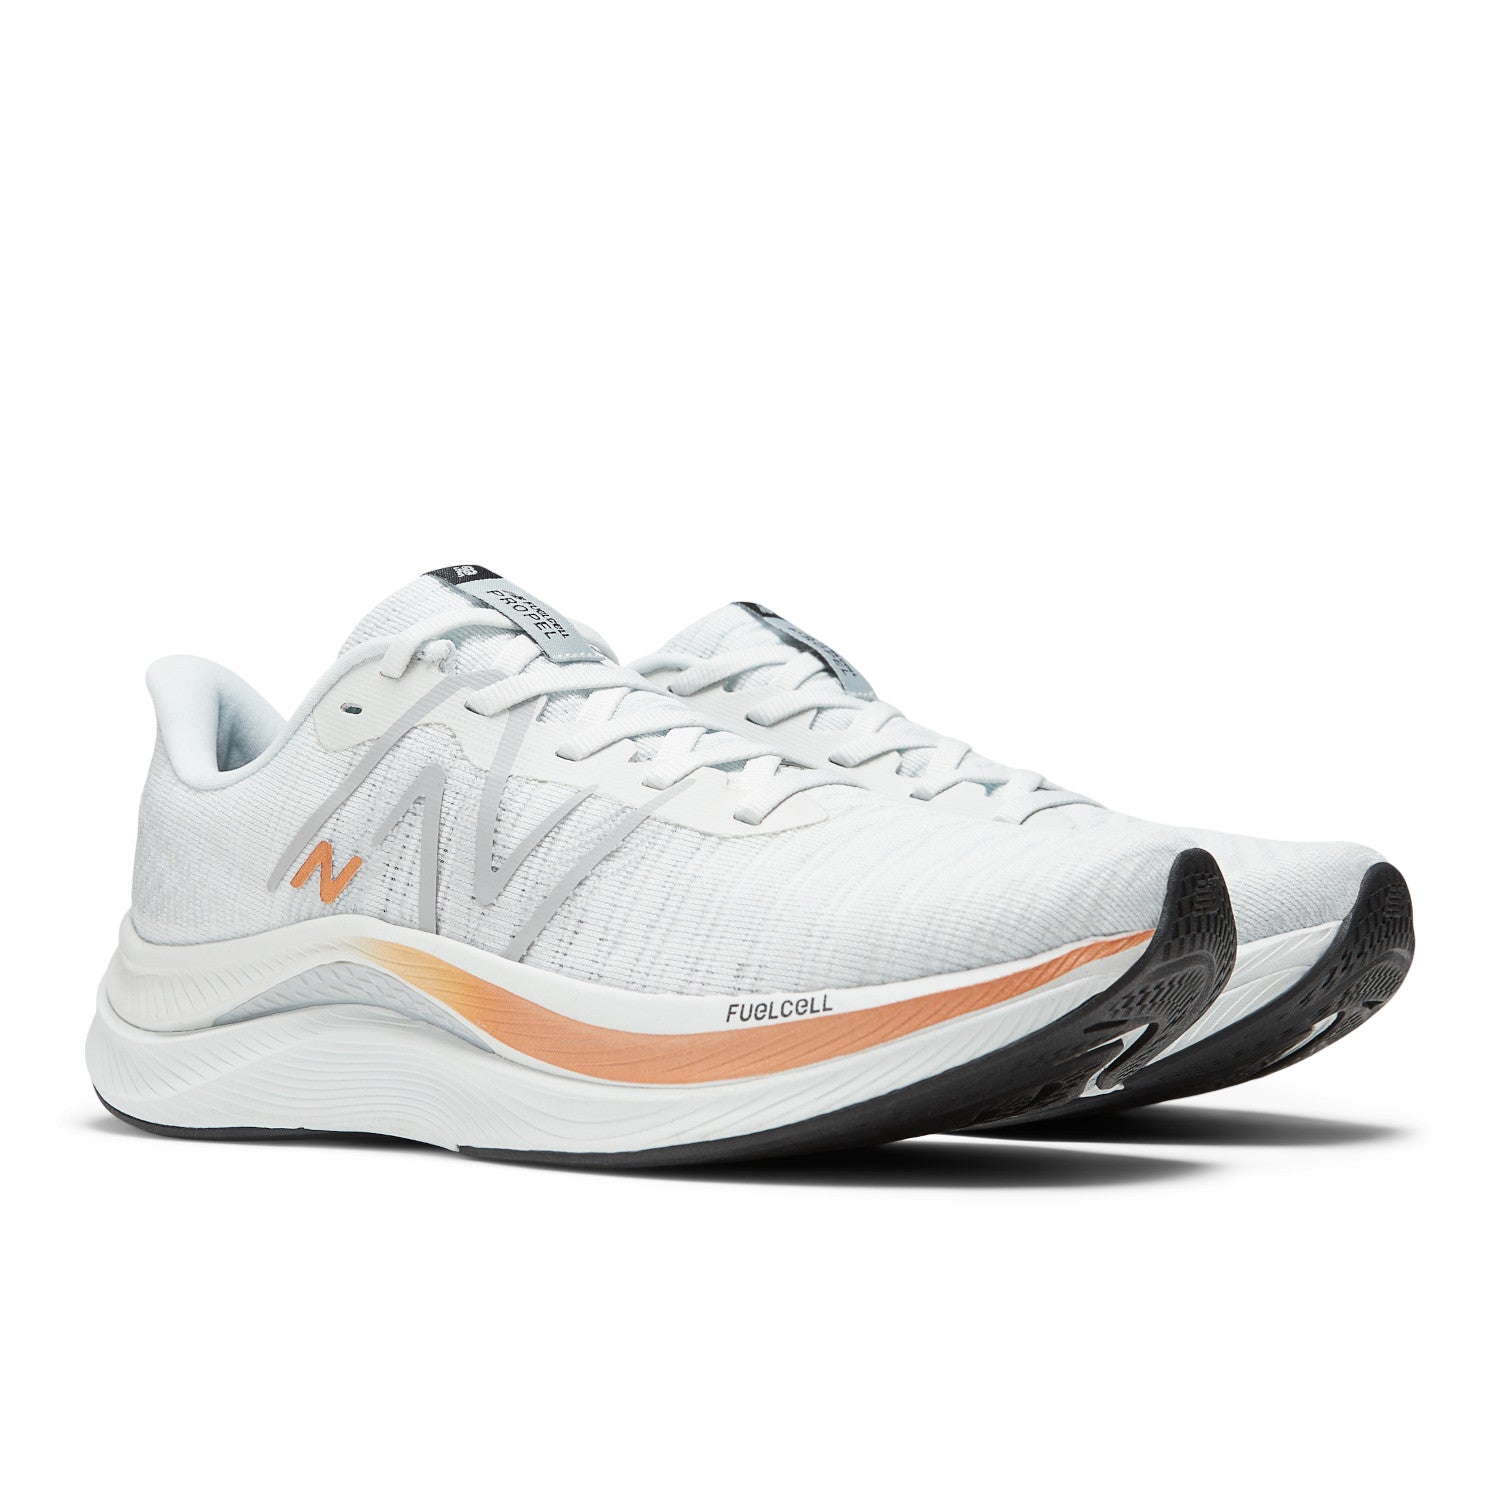 New Balance FuelCell Propel v4 WFCPRGB4 Women's